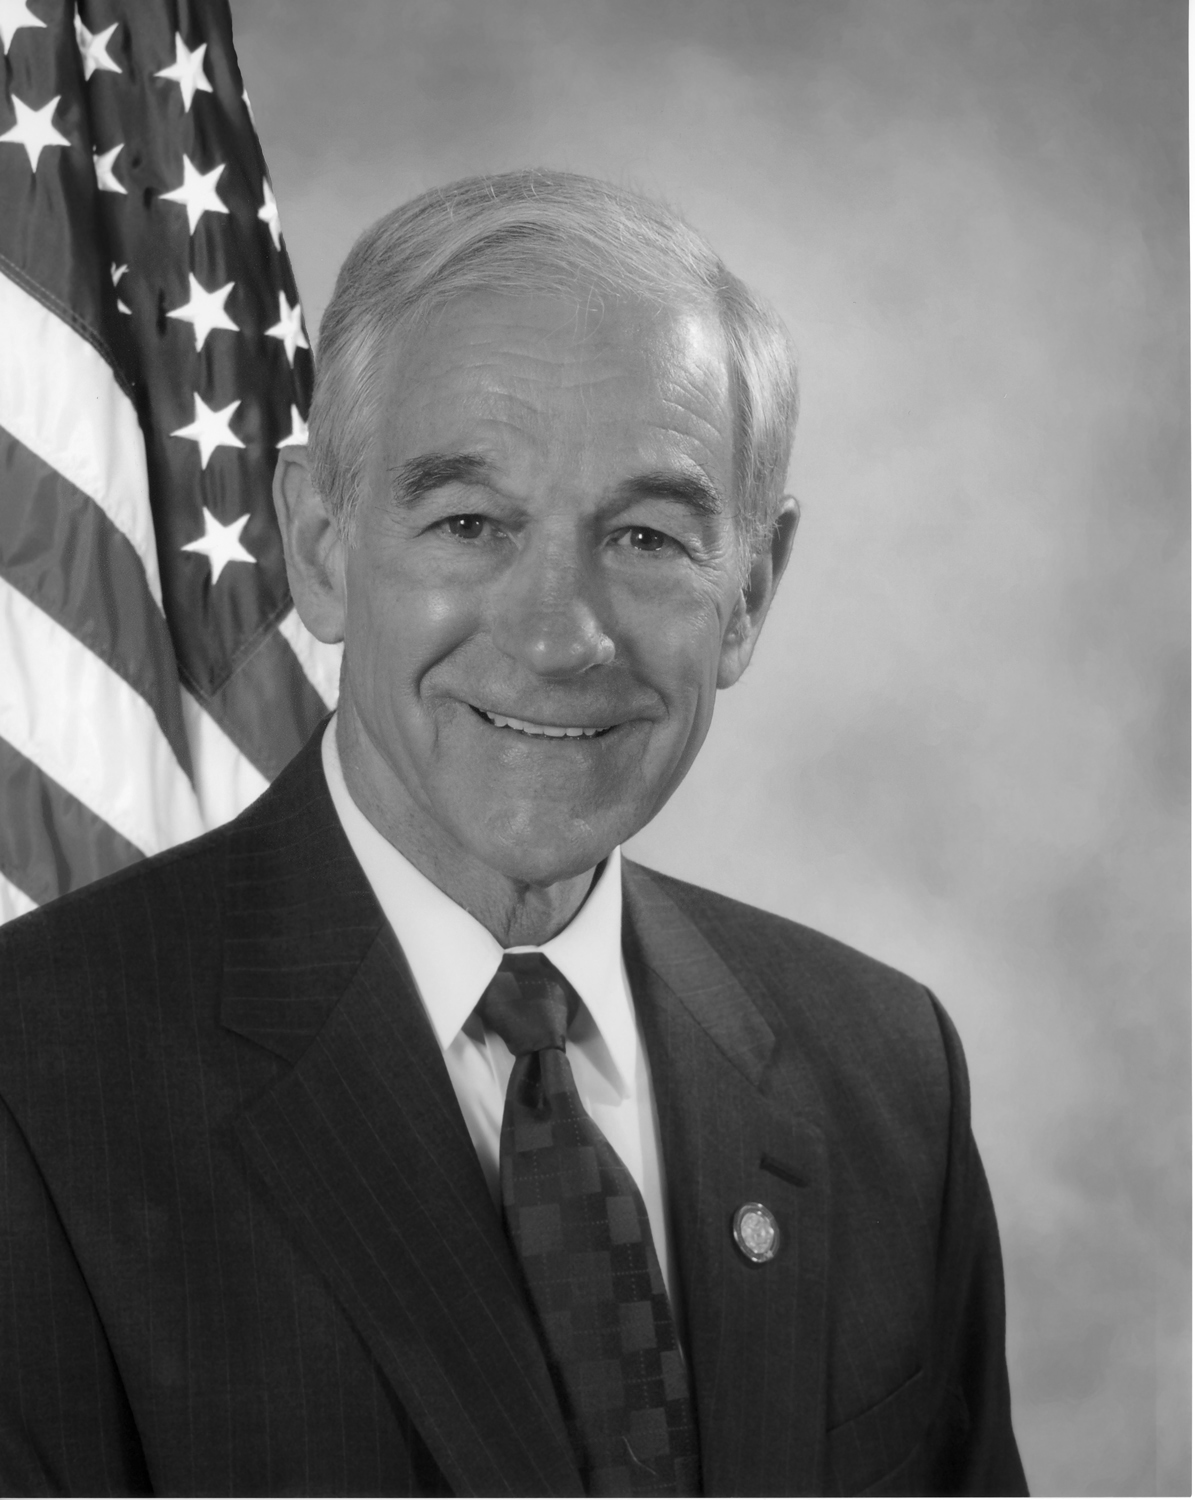 Dr. Ron Paul, Former U.S. Representative from Texas